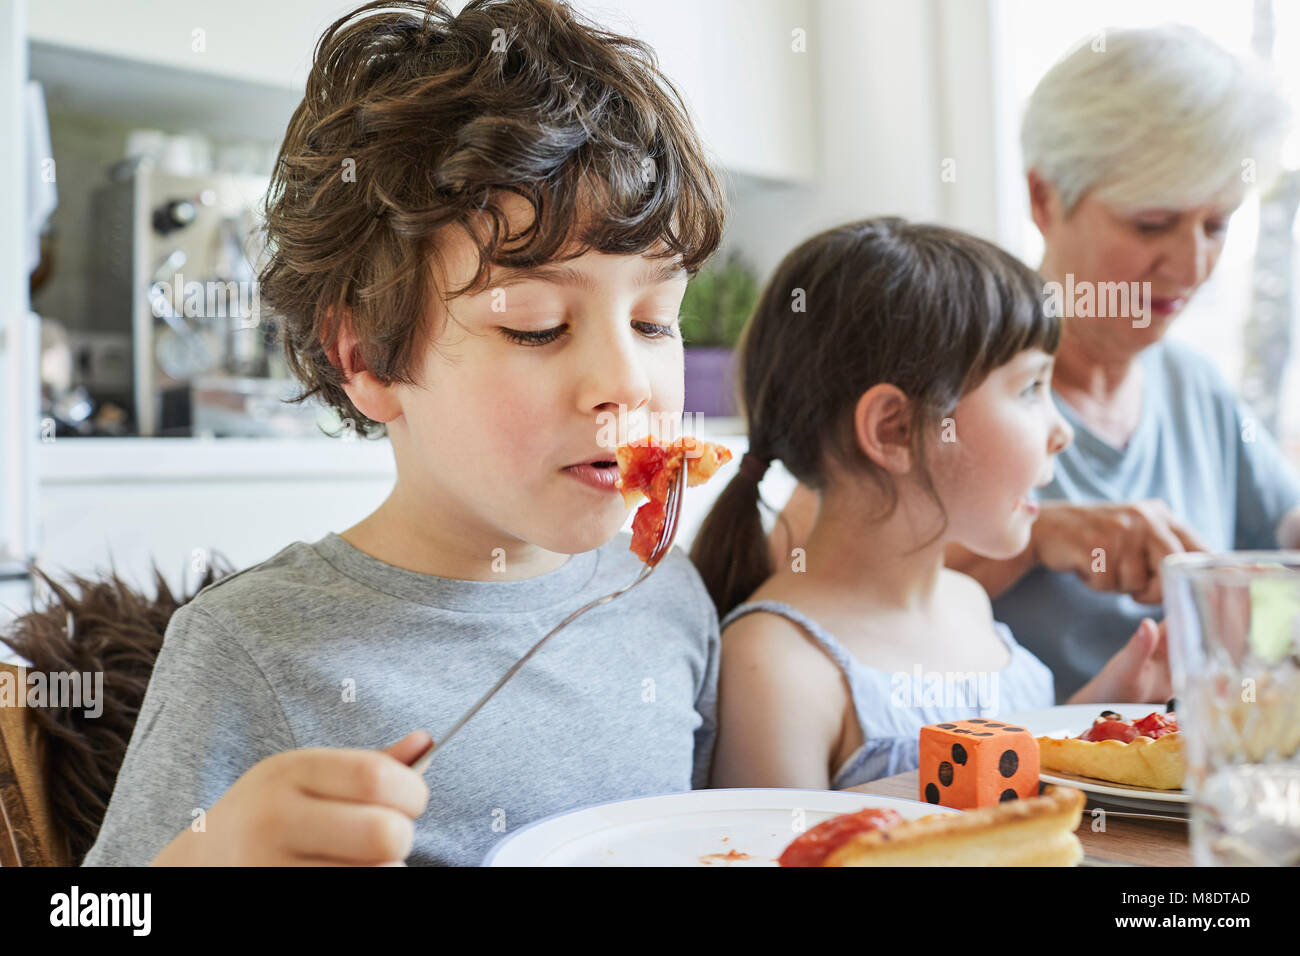 Young boy eating lunch at table with sister and grandmother Stock Photo